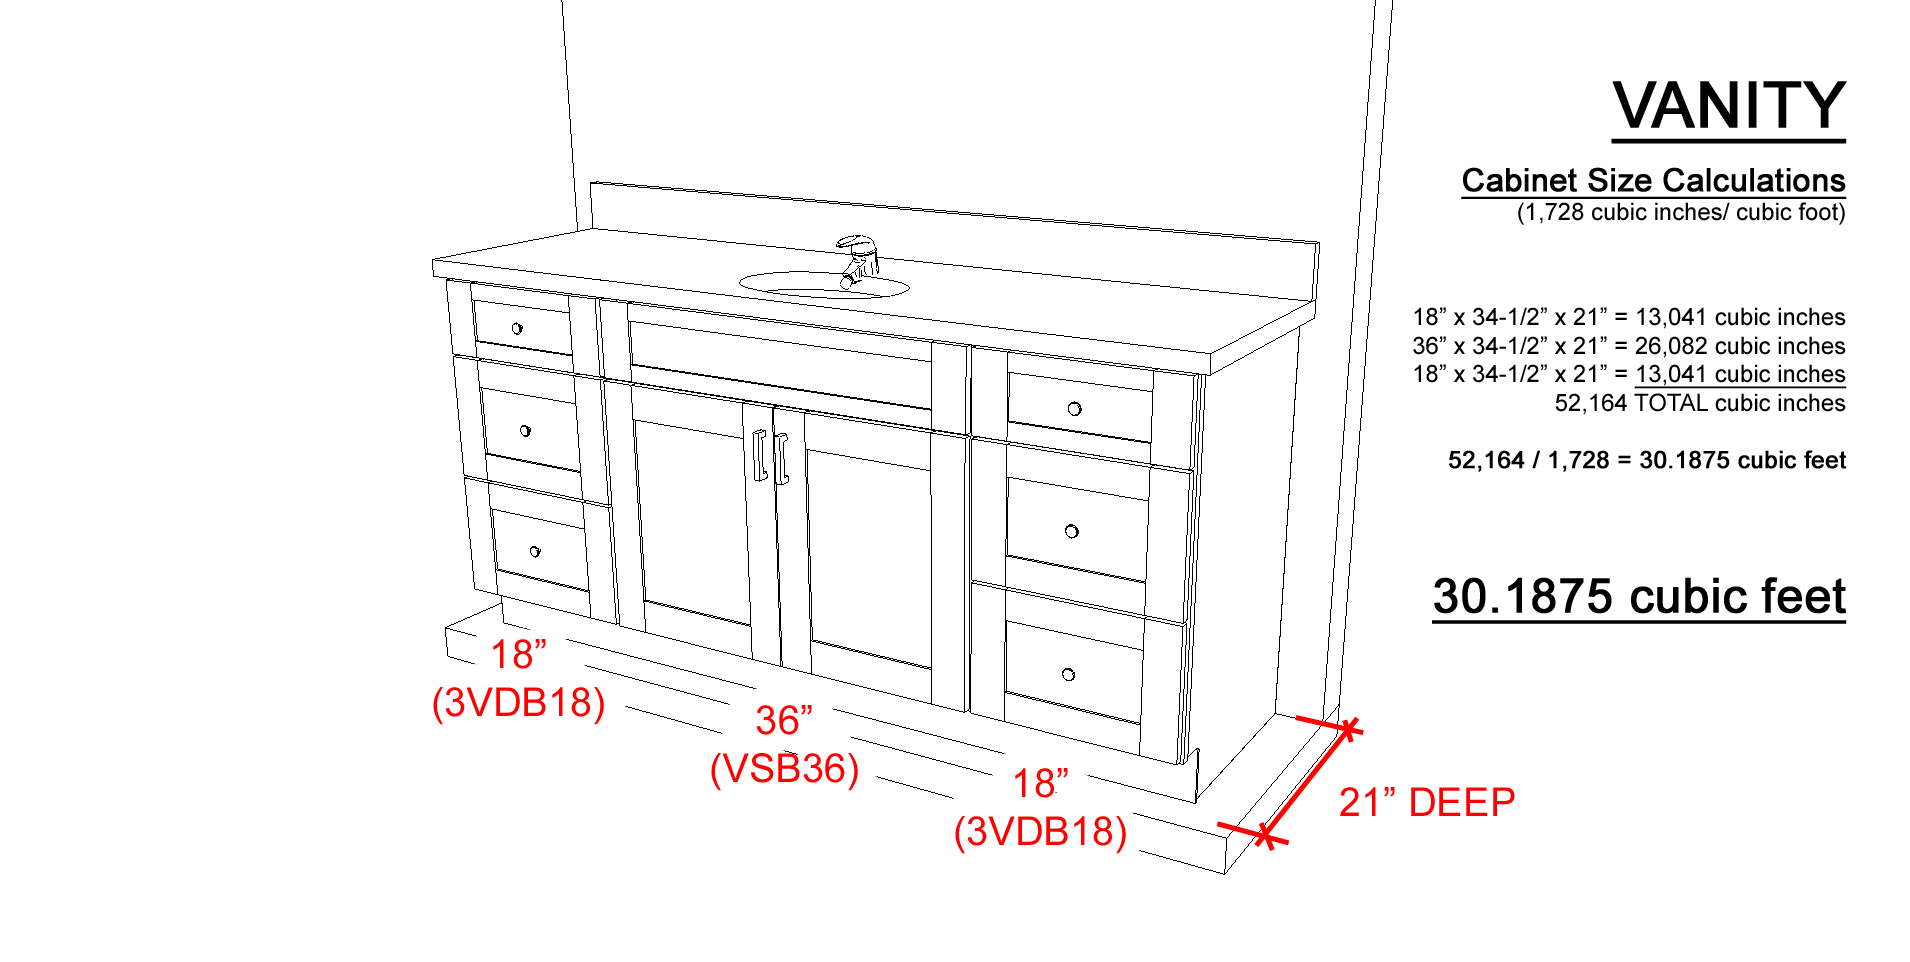 Vanity Pricing Analysis Why Are Vanity Cabinets More Expensive